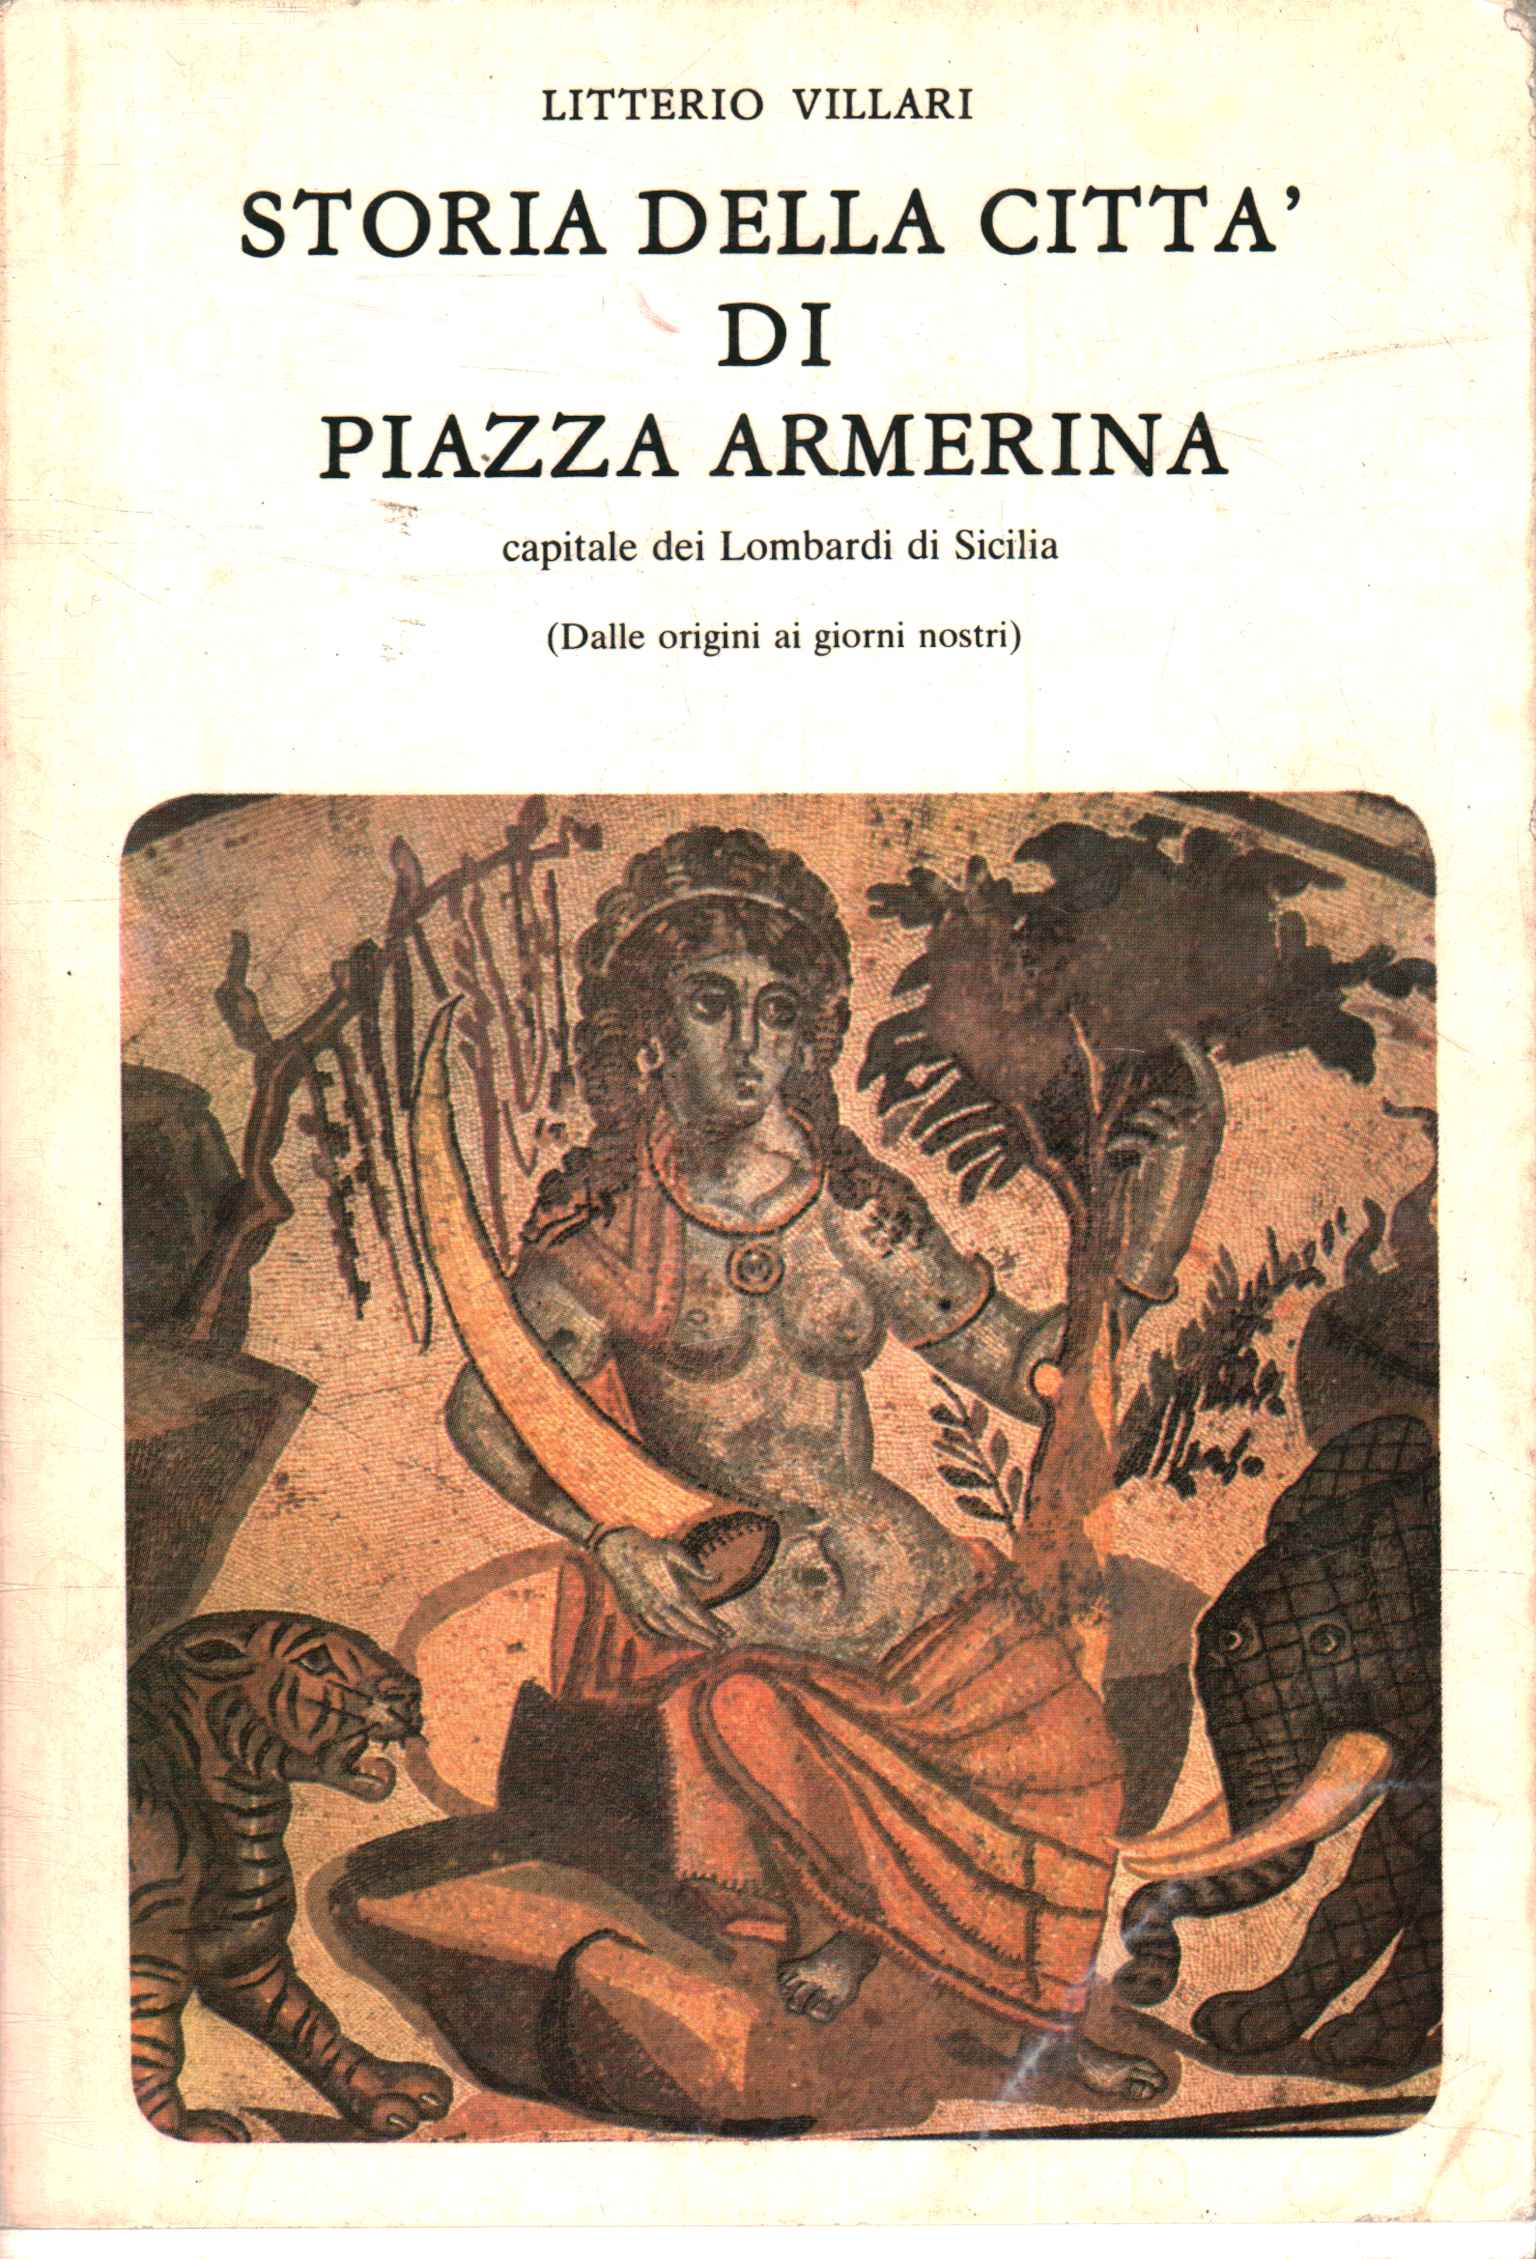 History of the city of Piazza Armeri